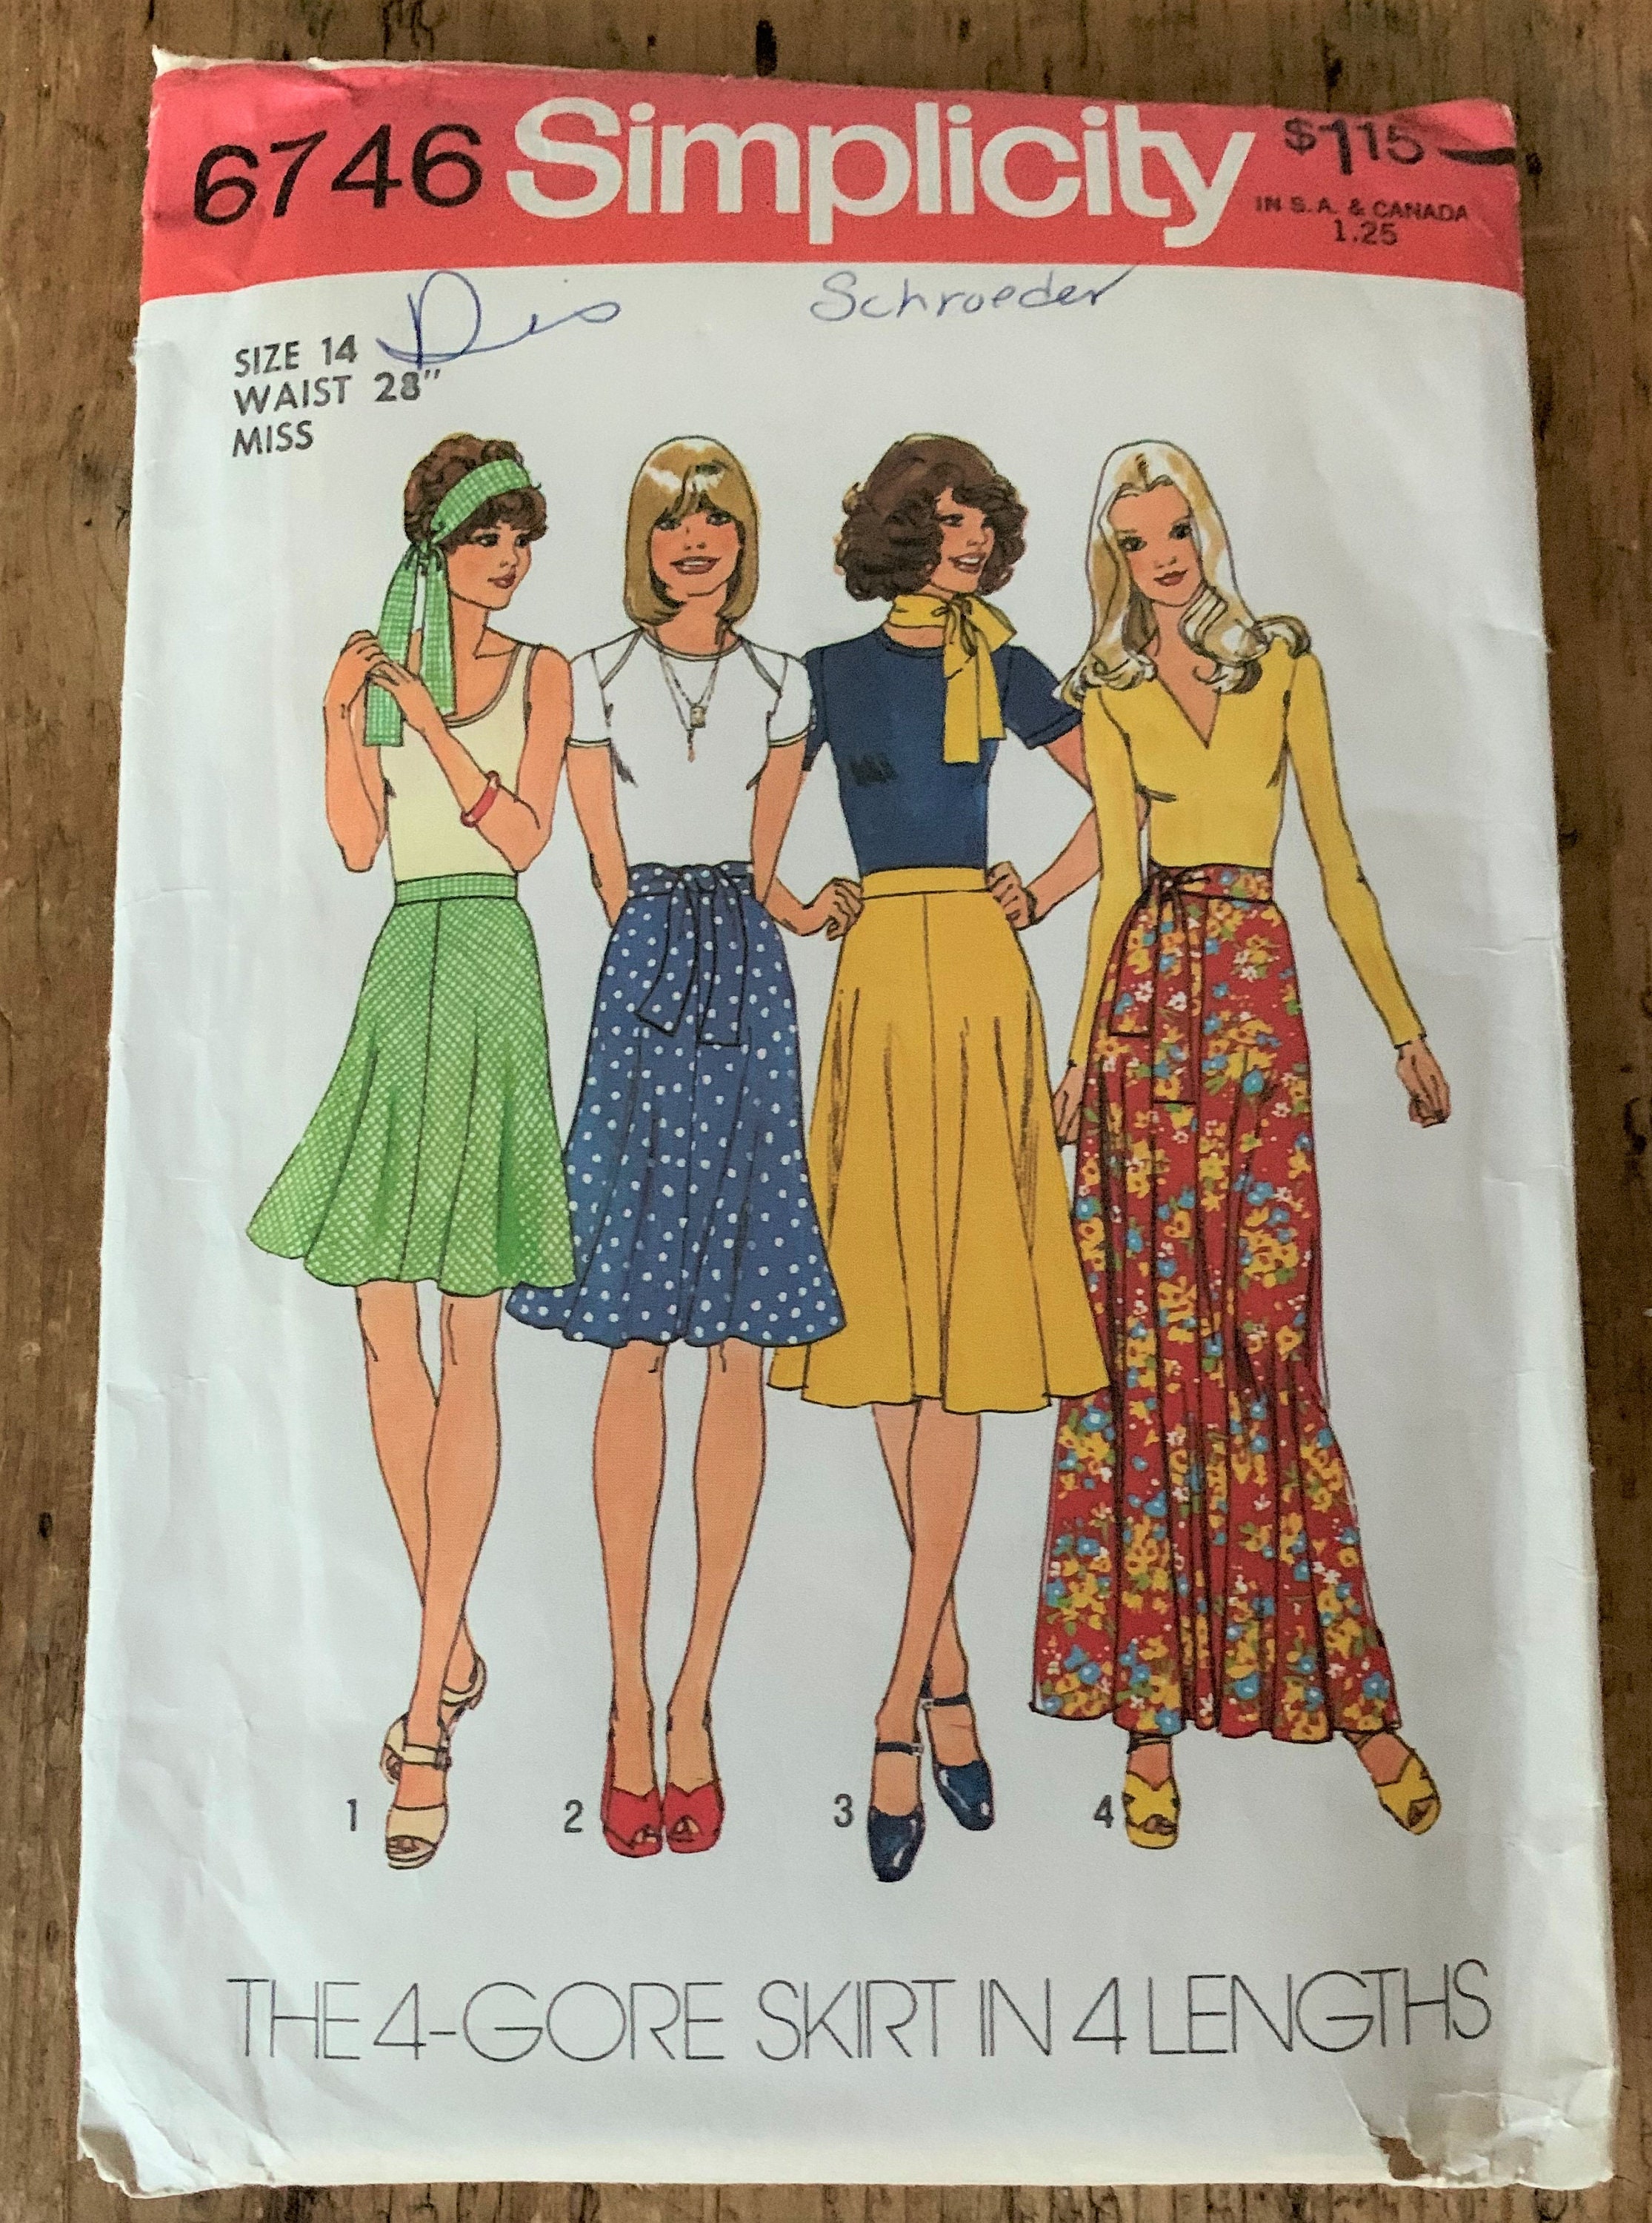 70s Simplicity 6746 4-gore Skirt Pattern in 4 Lengths High pic